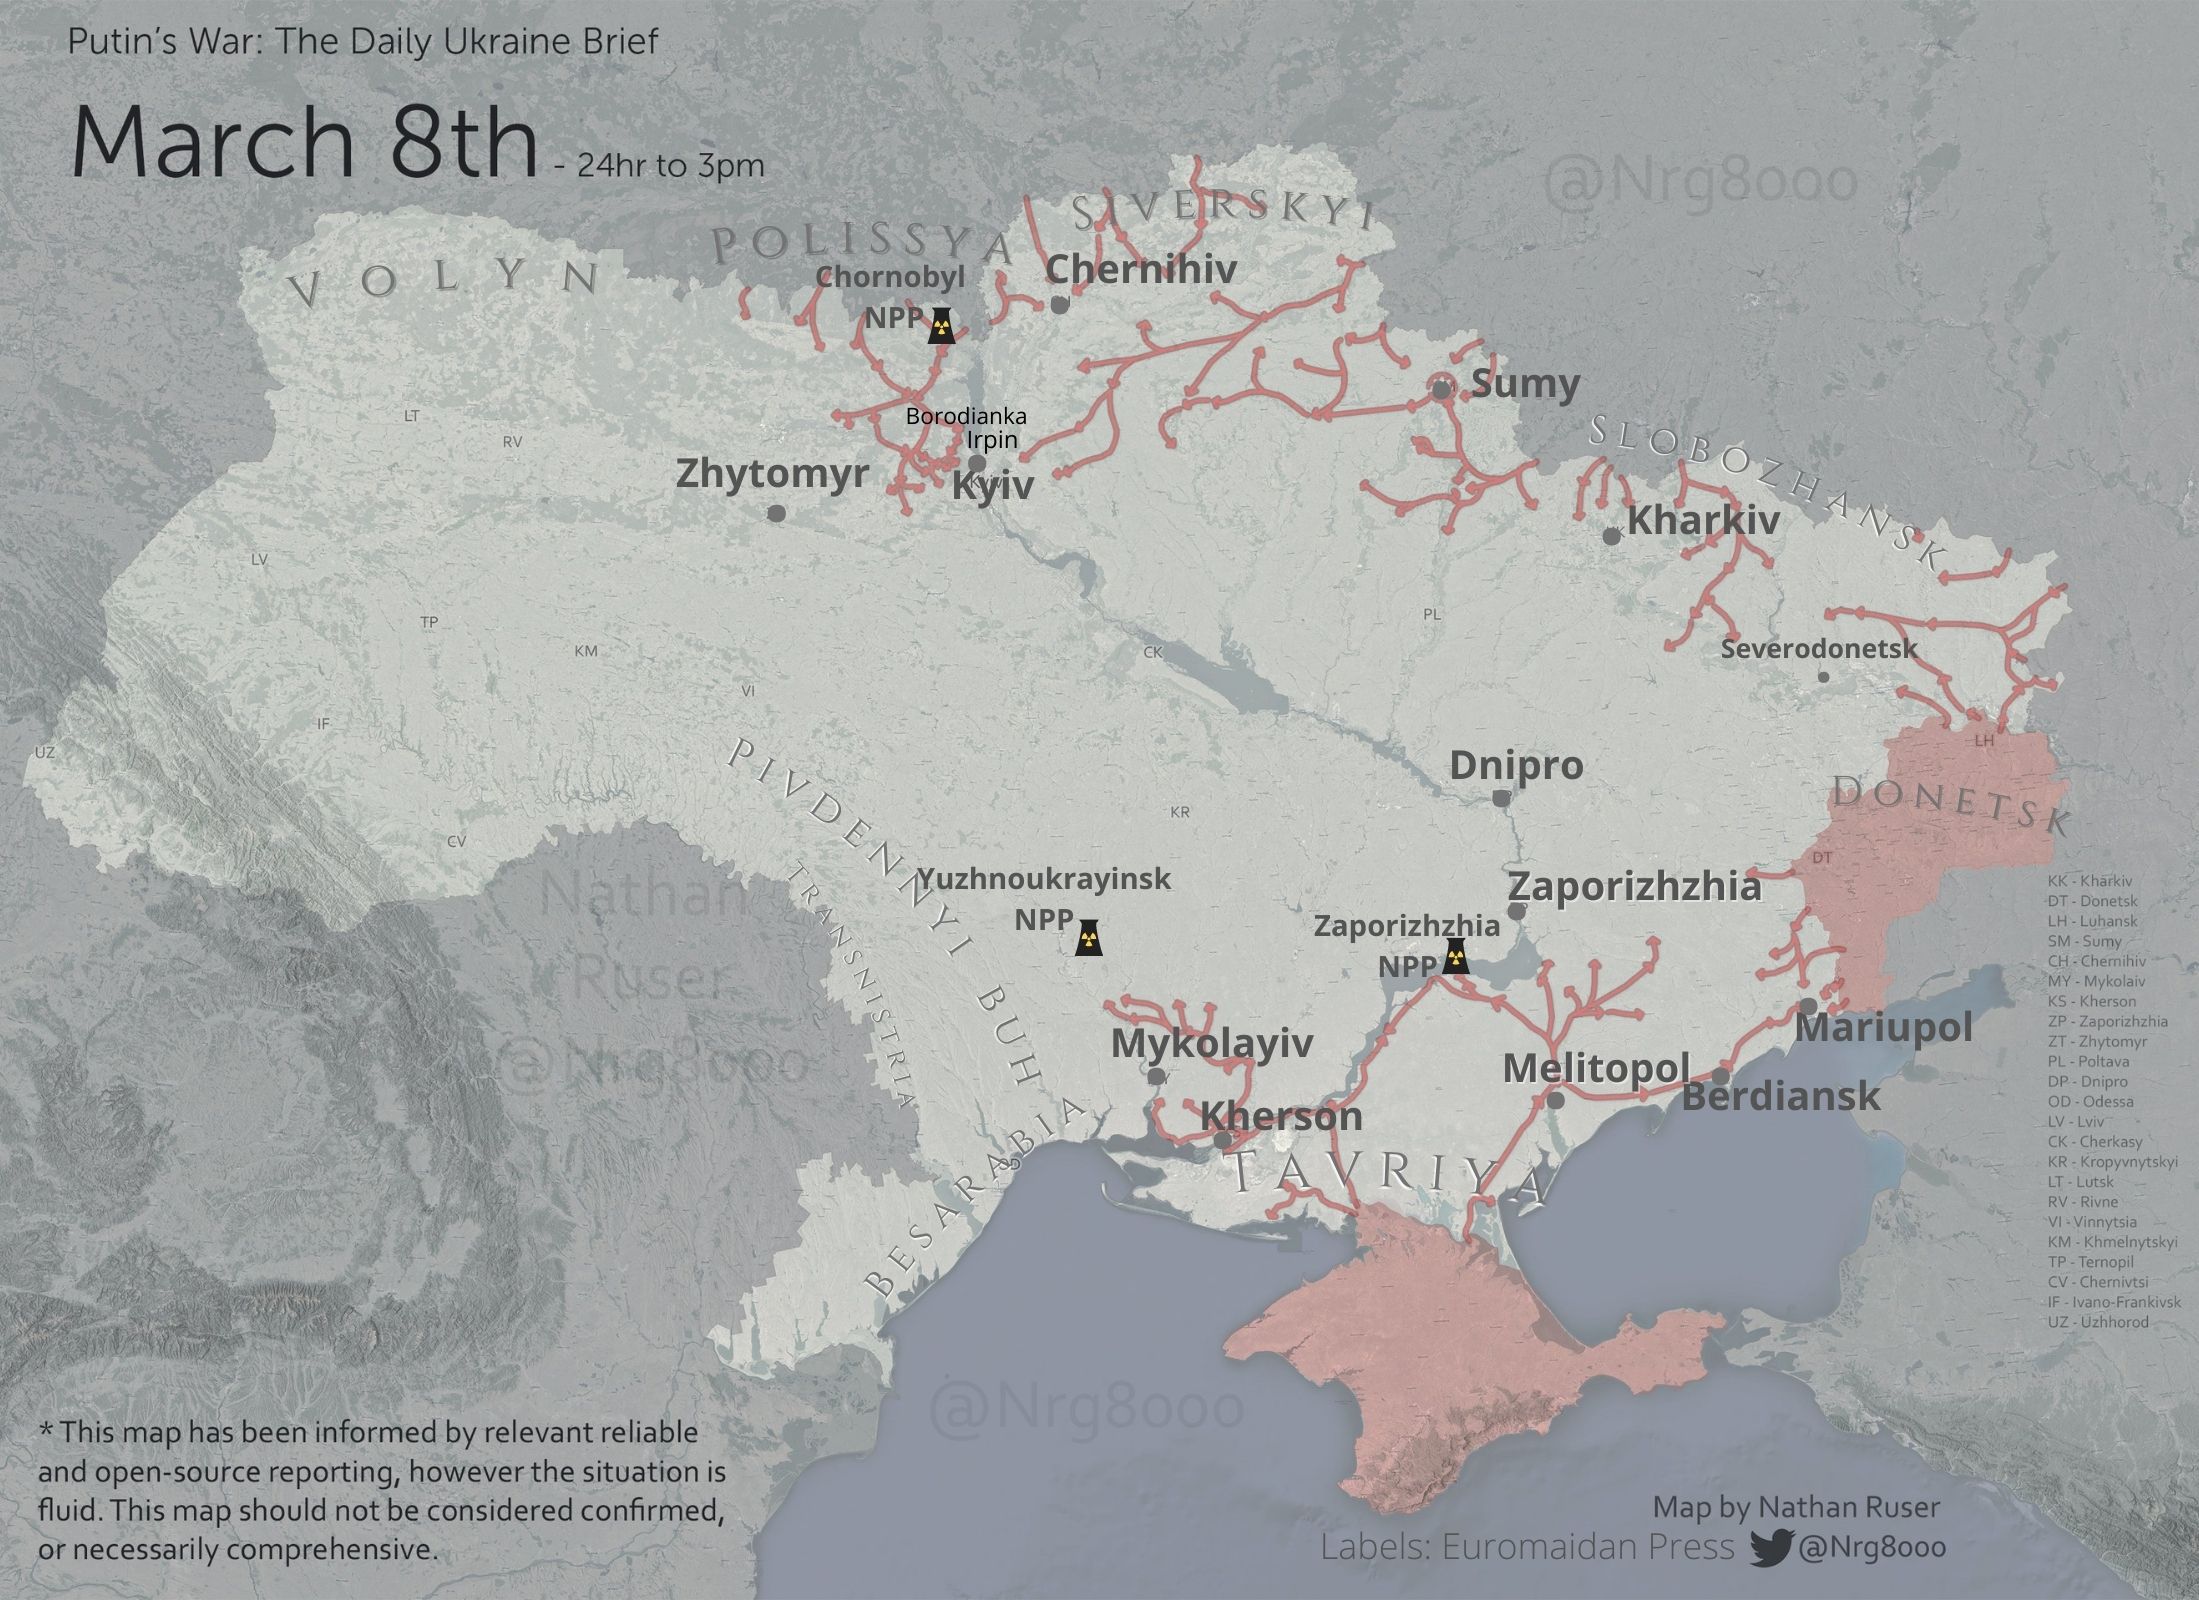 War in Ukraine, Day 14: Putin turns Russia into most-sanctioned nation in the world ~~